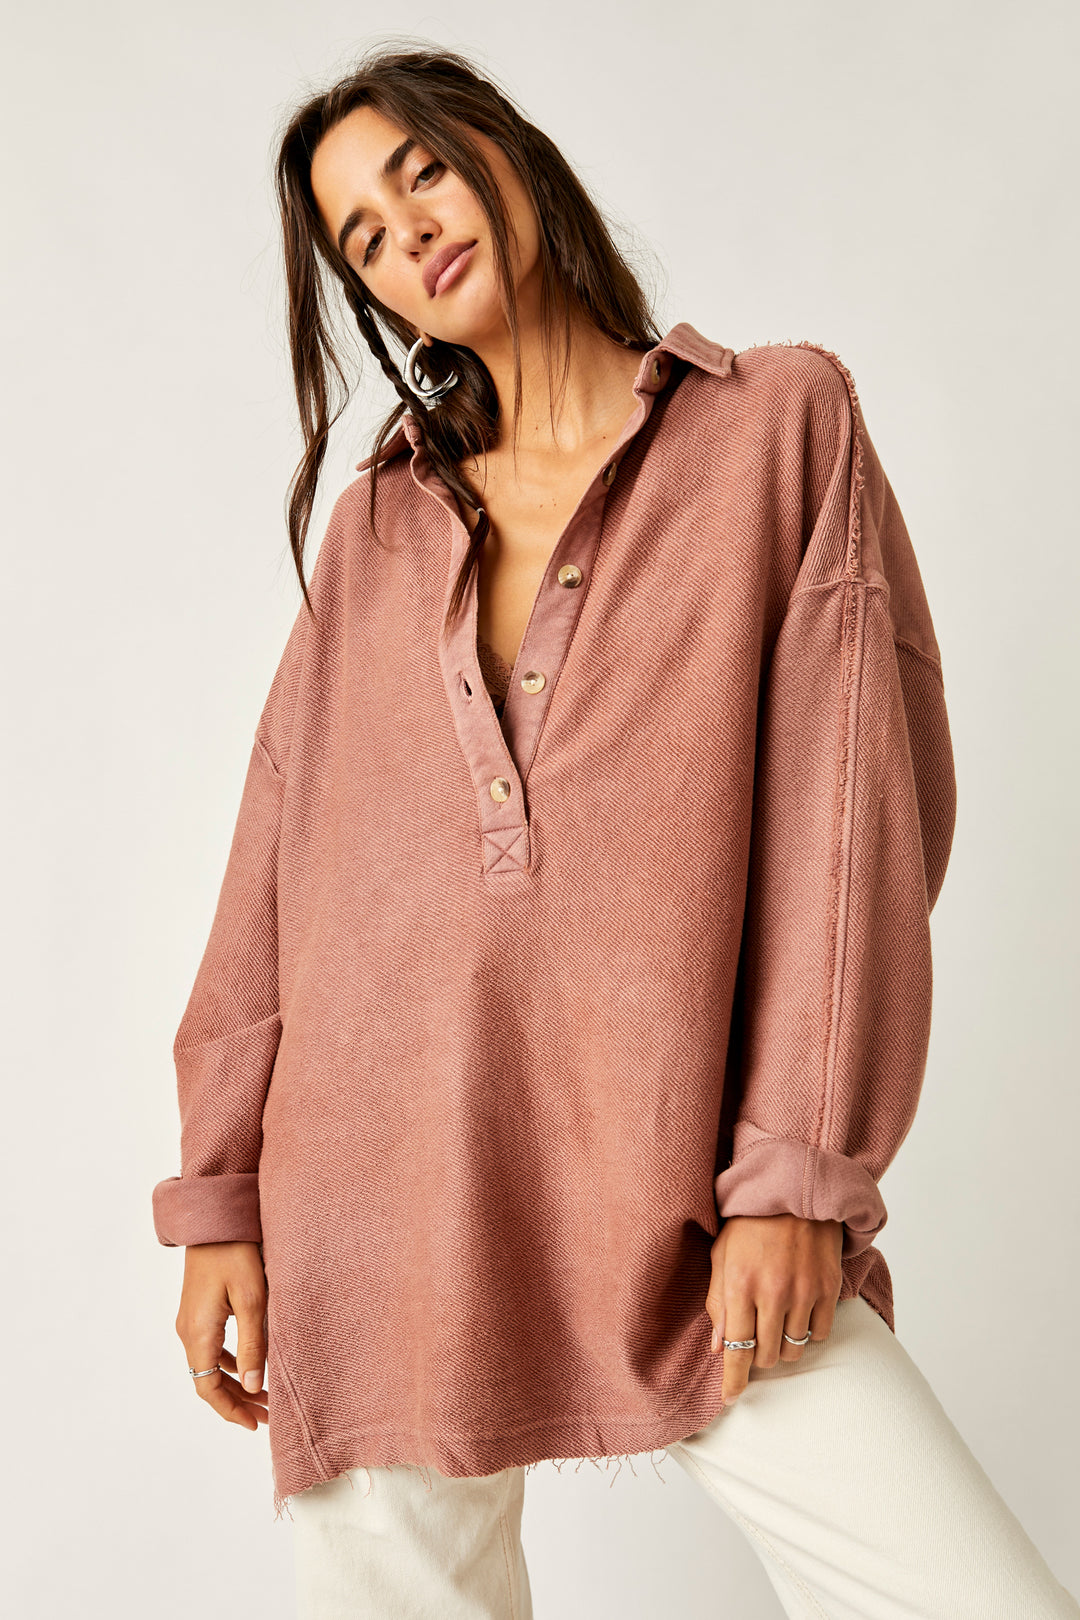 Free People Willow Polo Top in Antique Oak